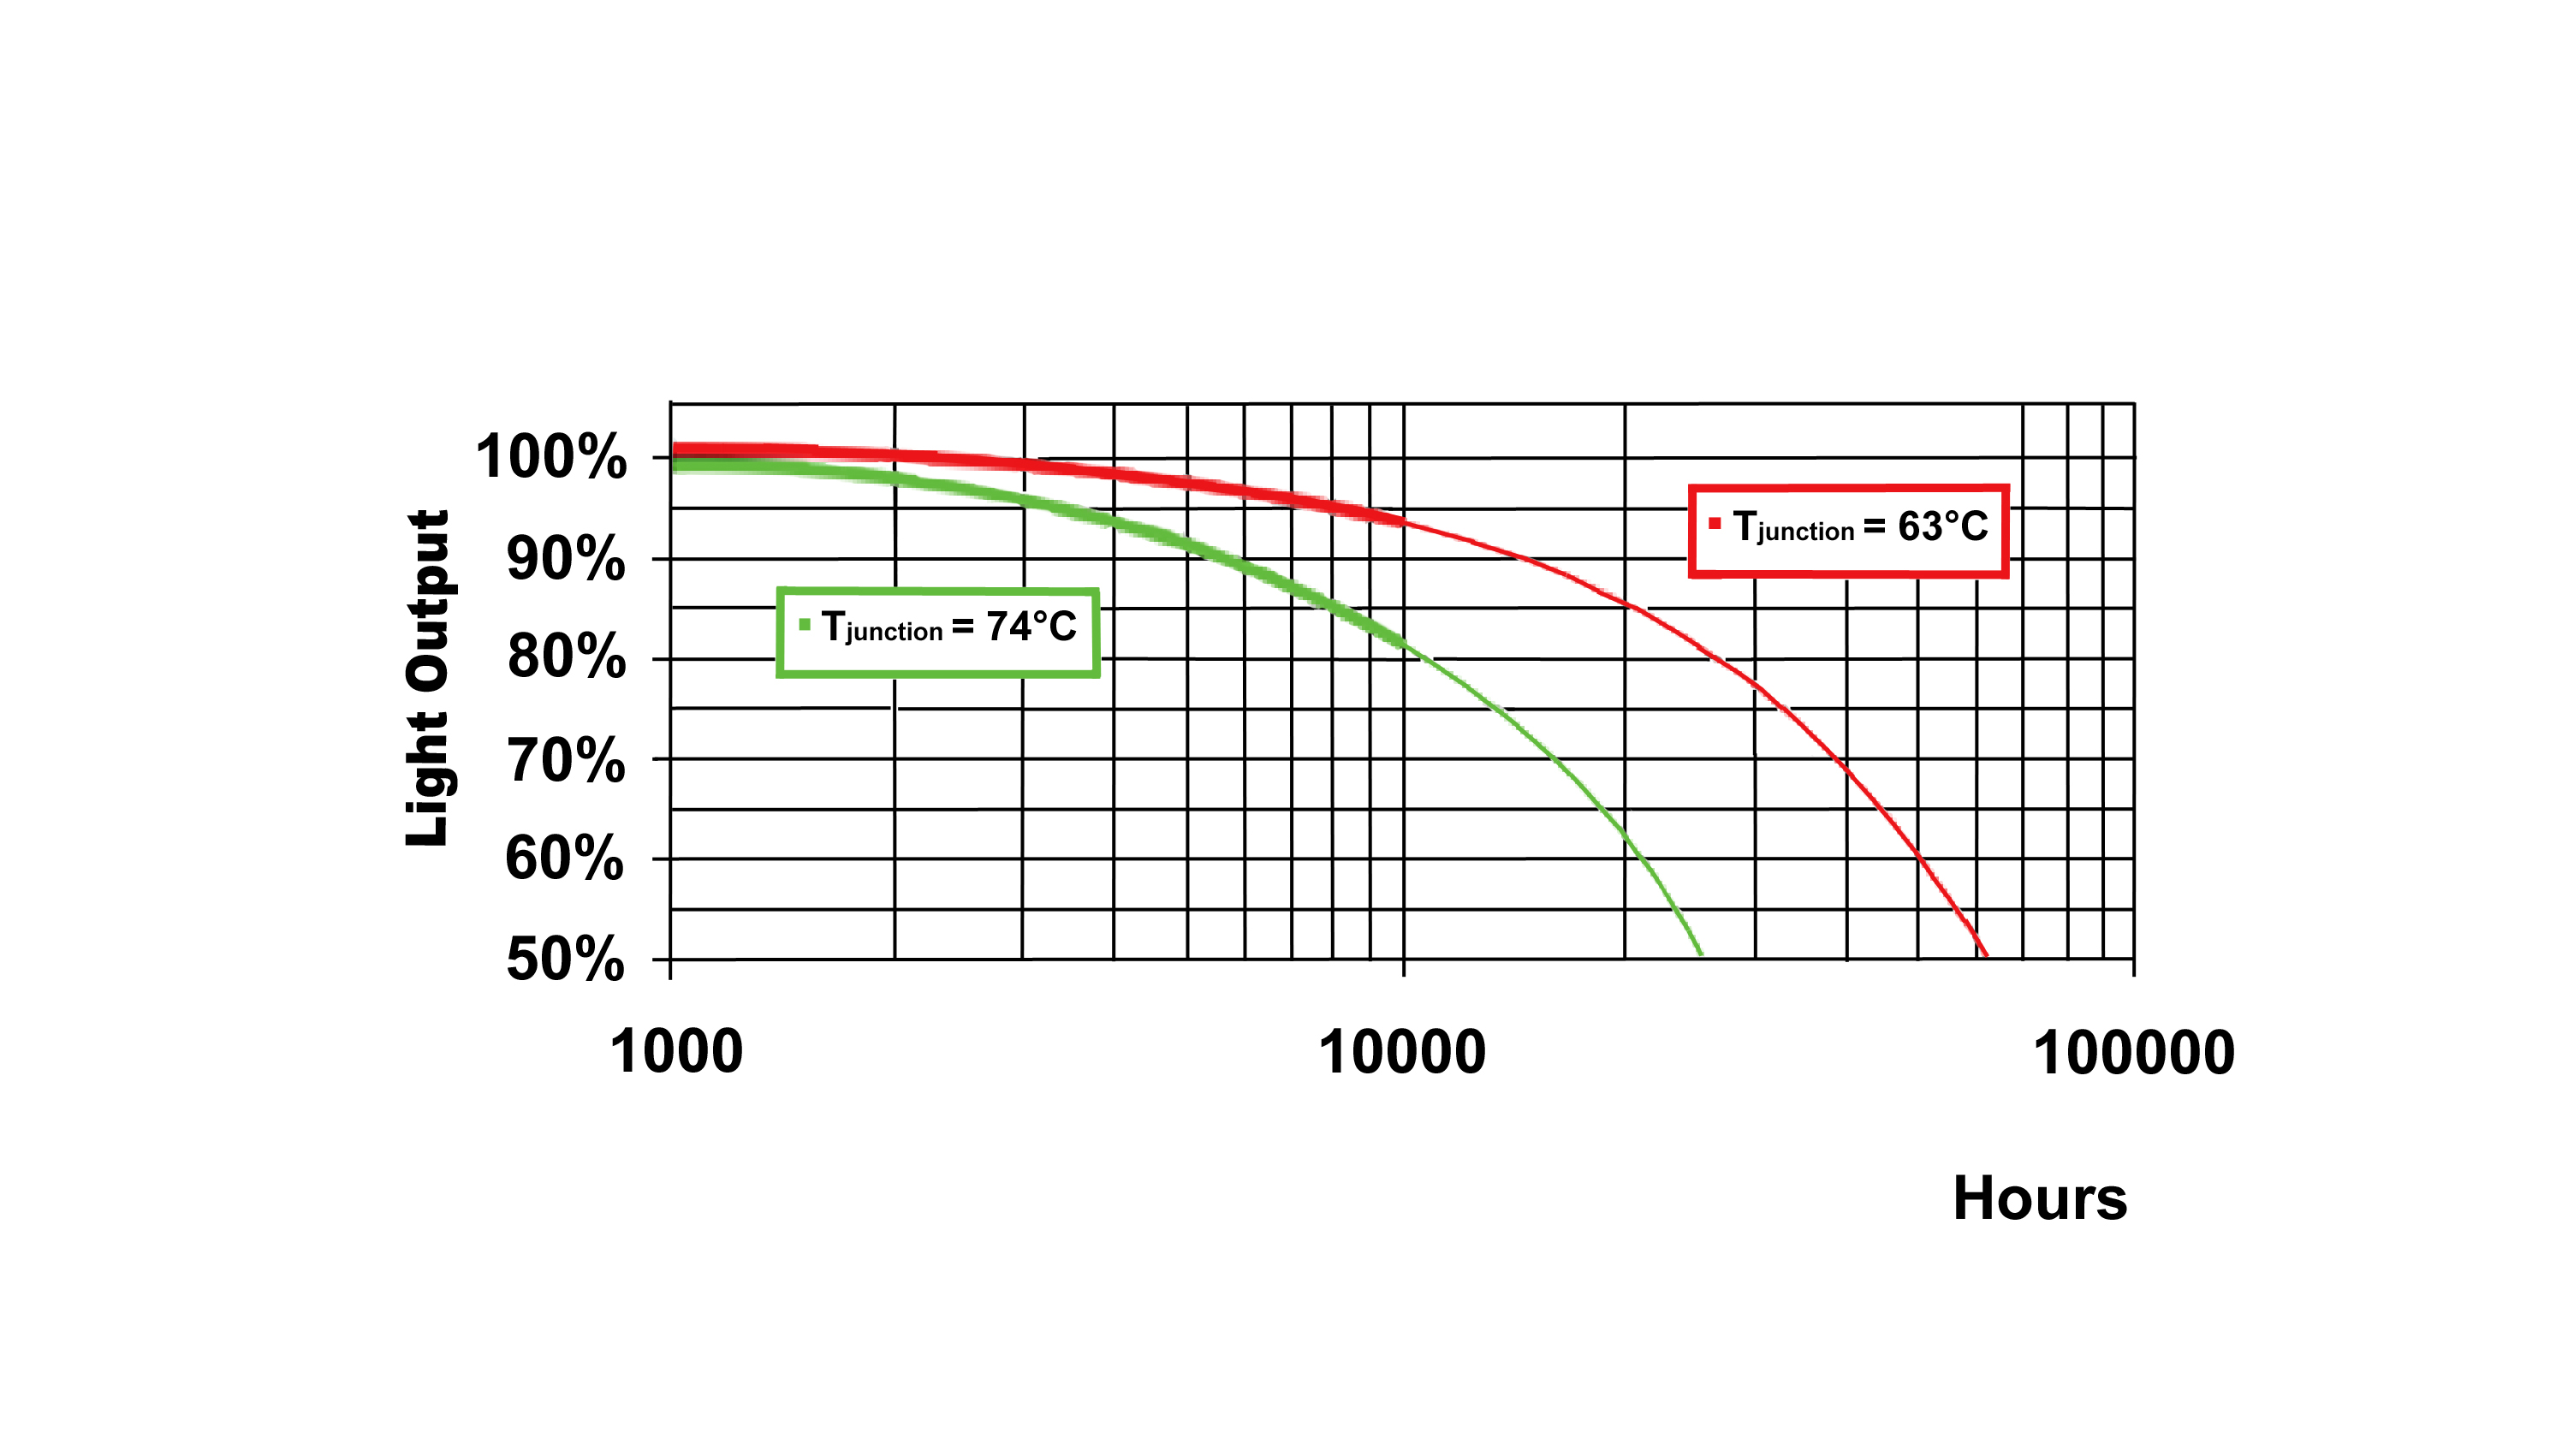 Figure 1: The lifetime of LEDs is a function of the junction temperature (Source: EOS)